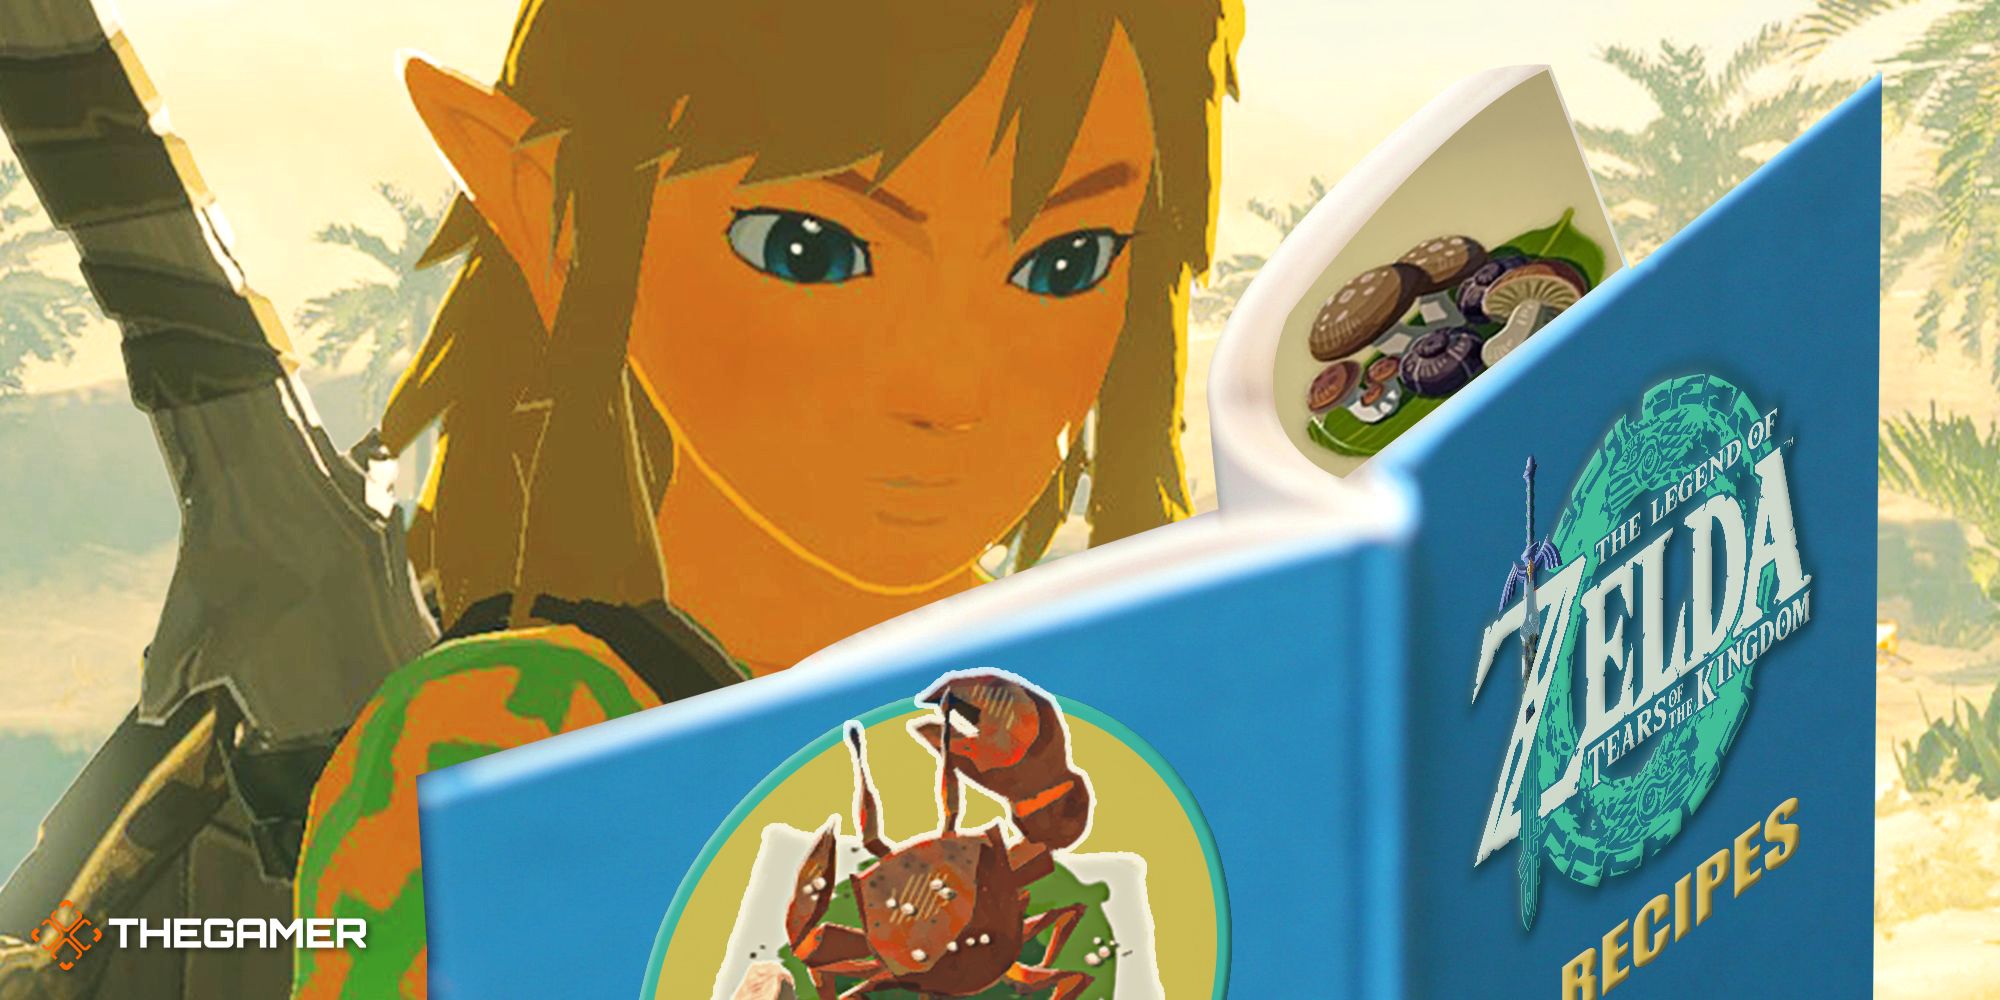 Full 'Legend of Zelda: Breath of the Wild' Recipe Book with Meals